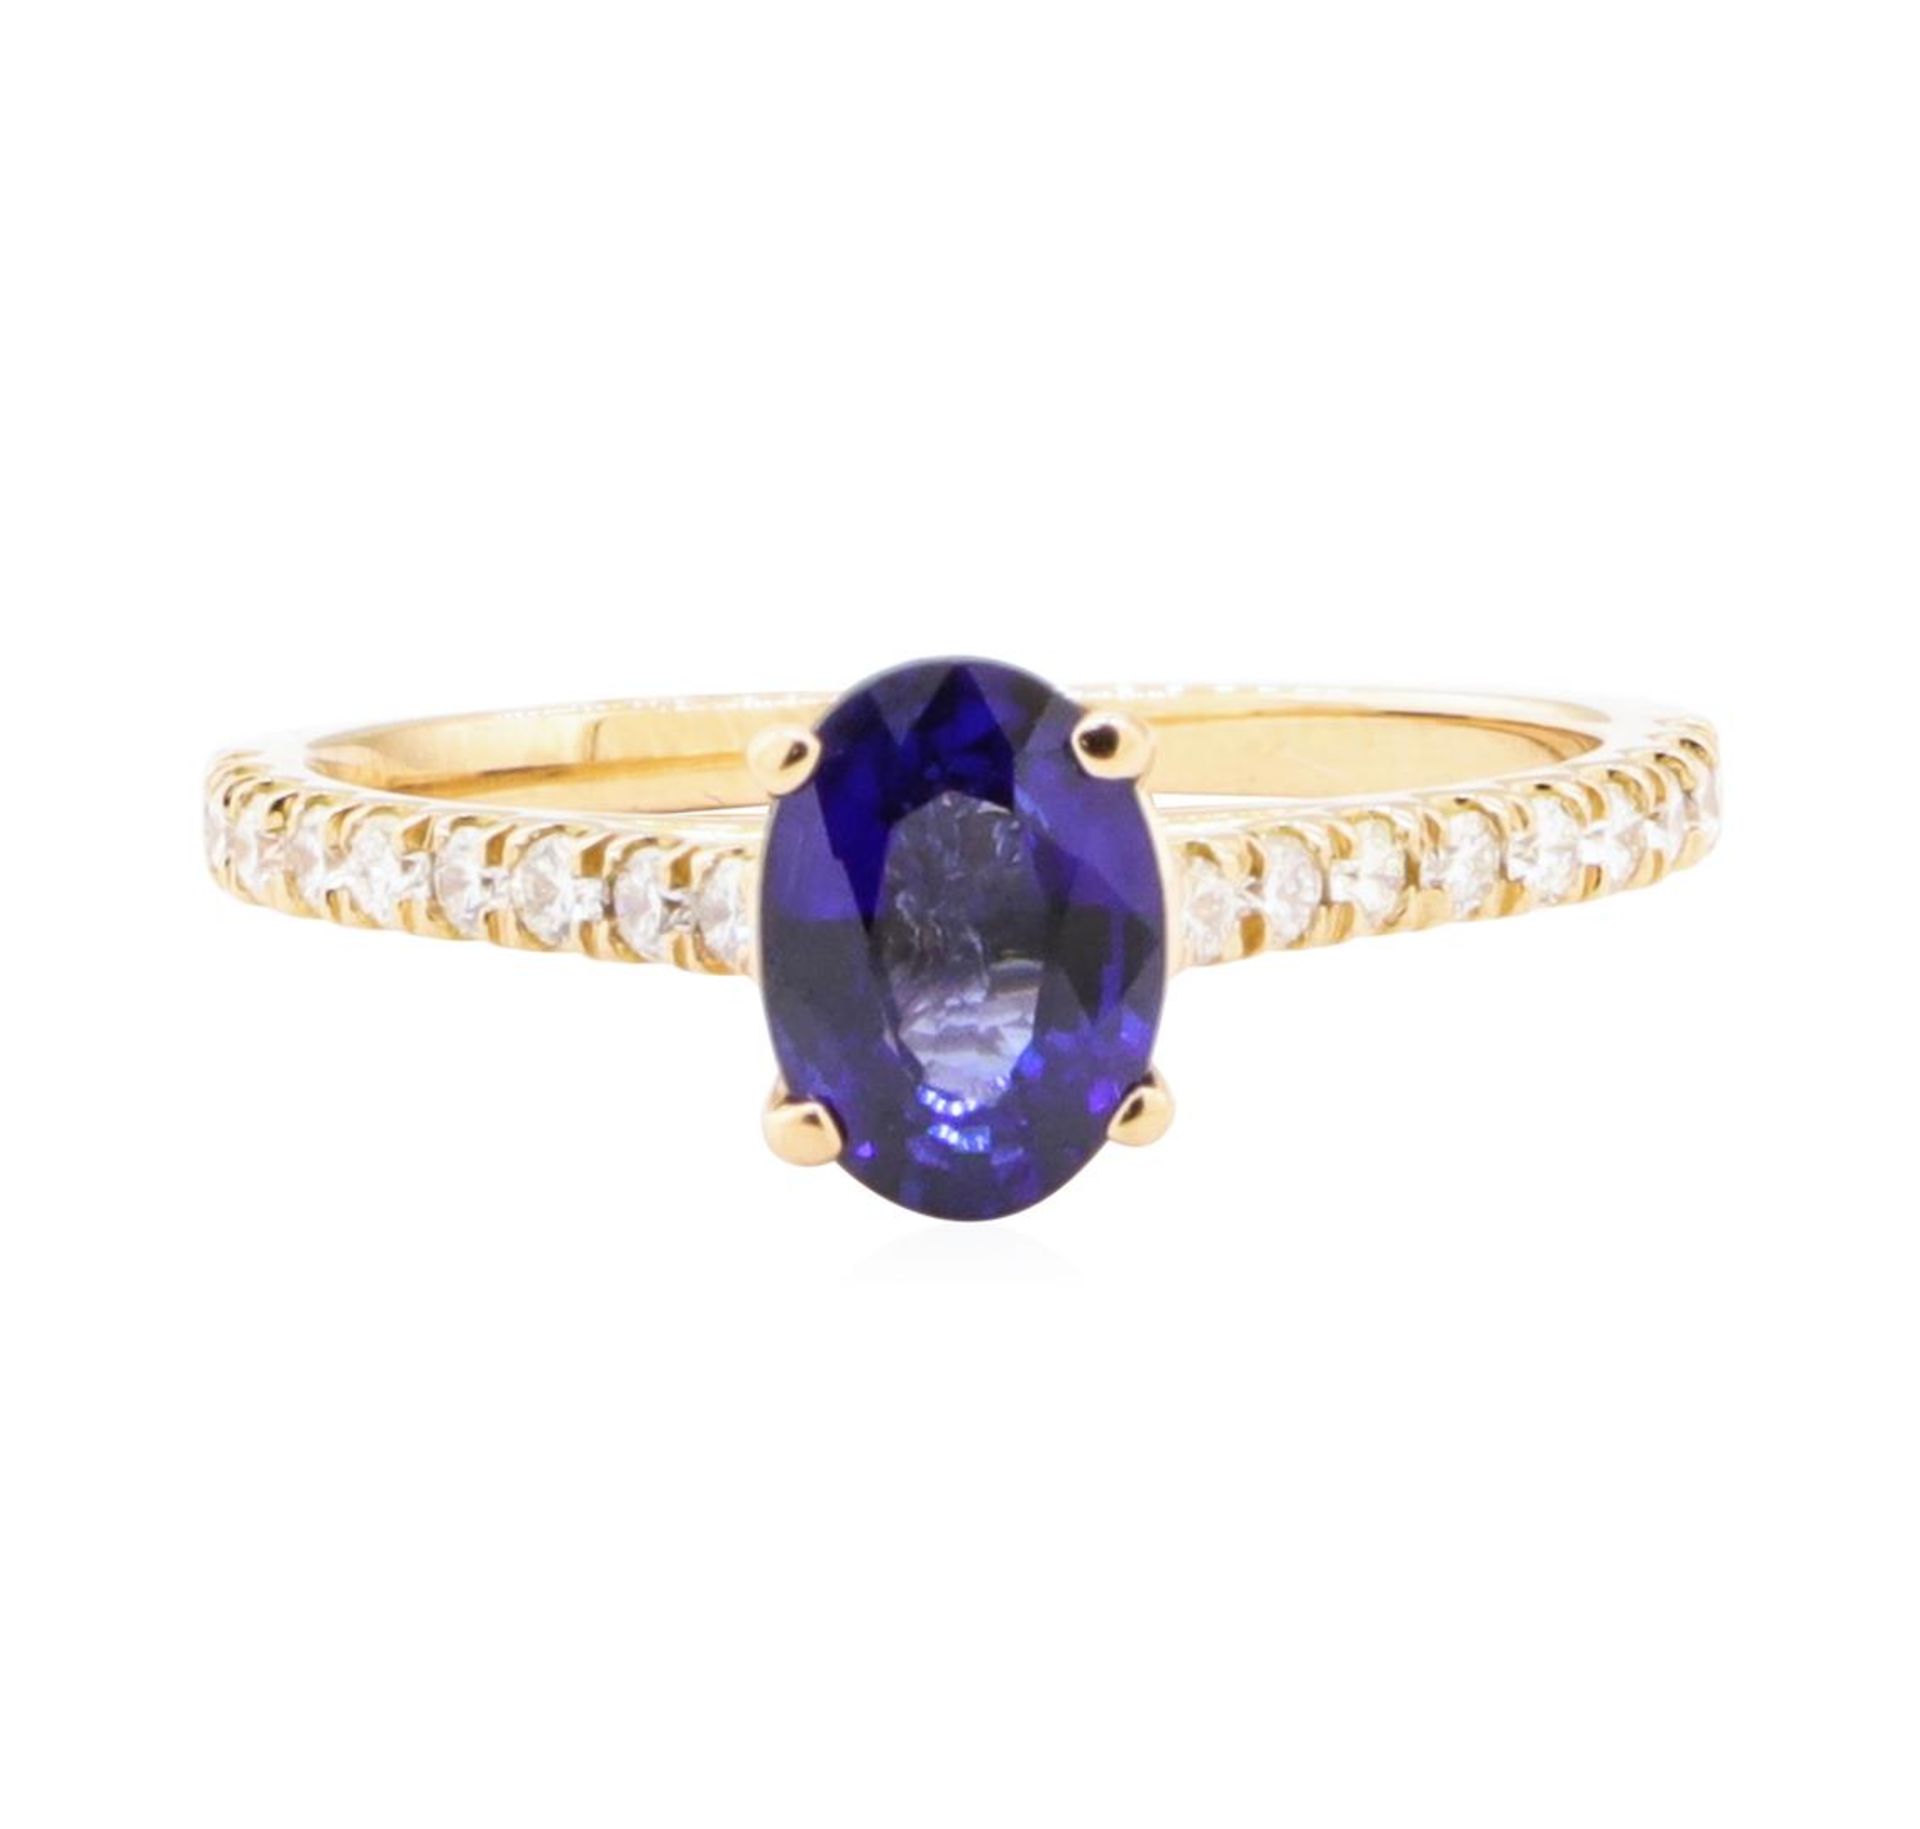 1.24ctw Sapphire and Diamond Ring - 14KT Rose Gold - Image 2 of 4